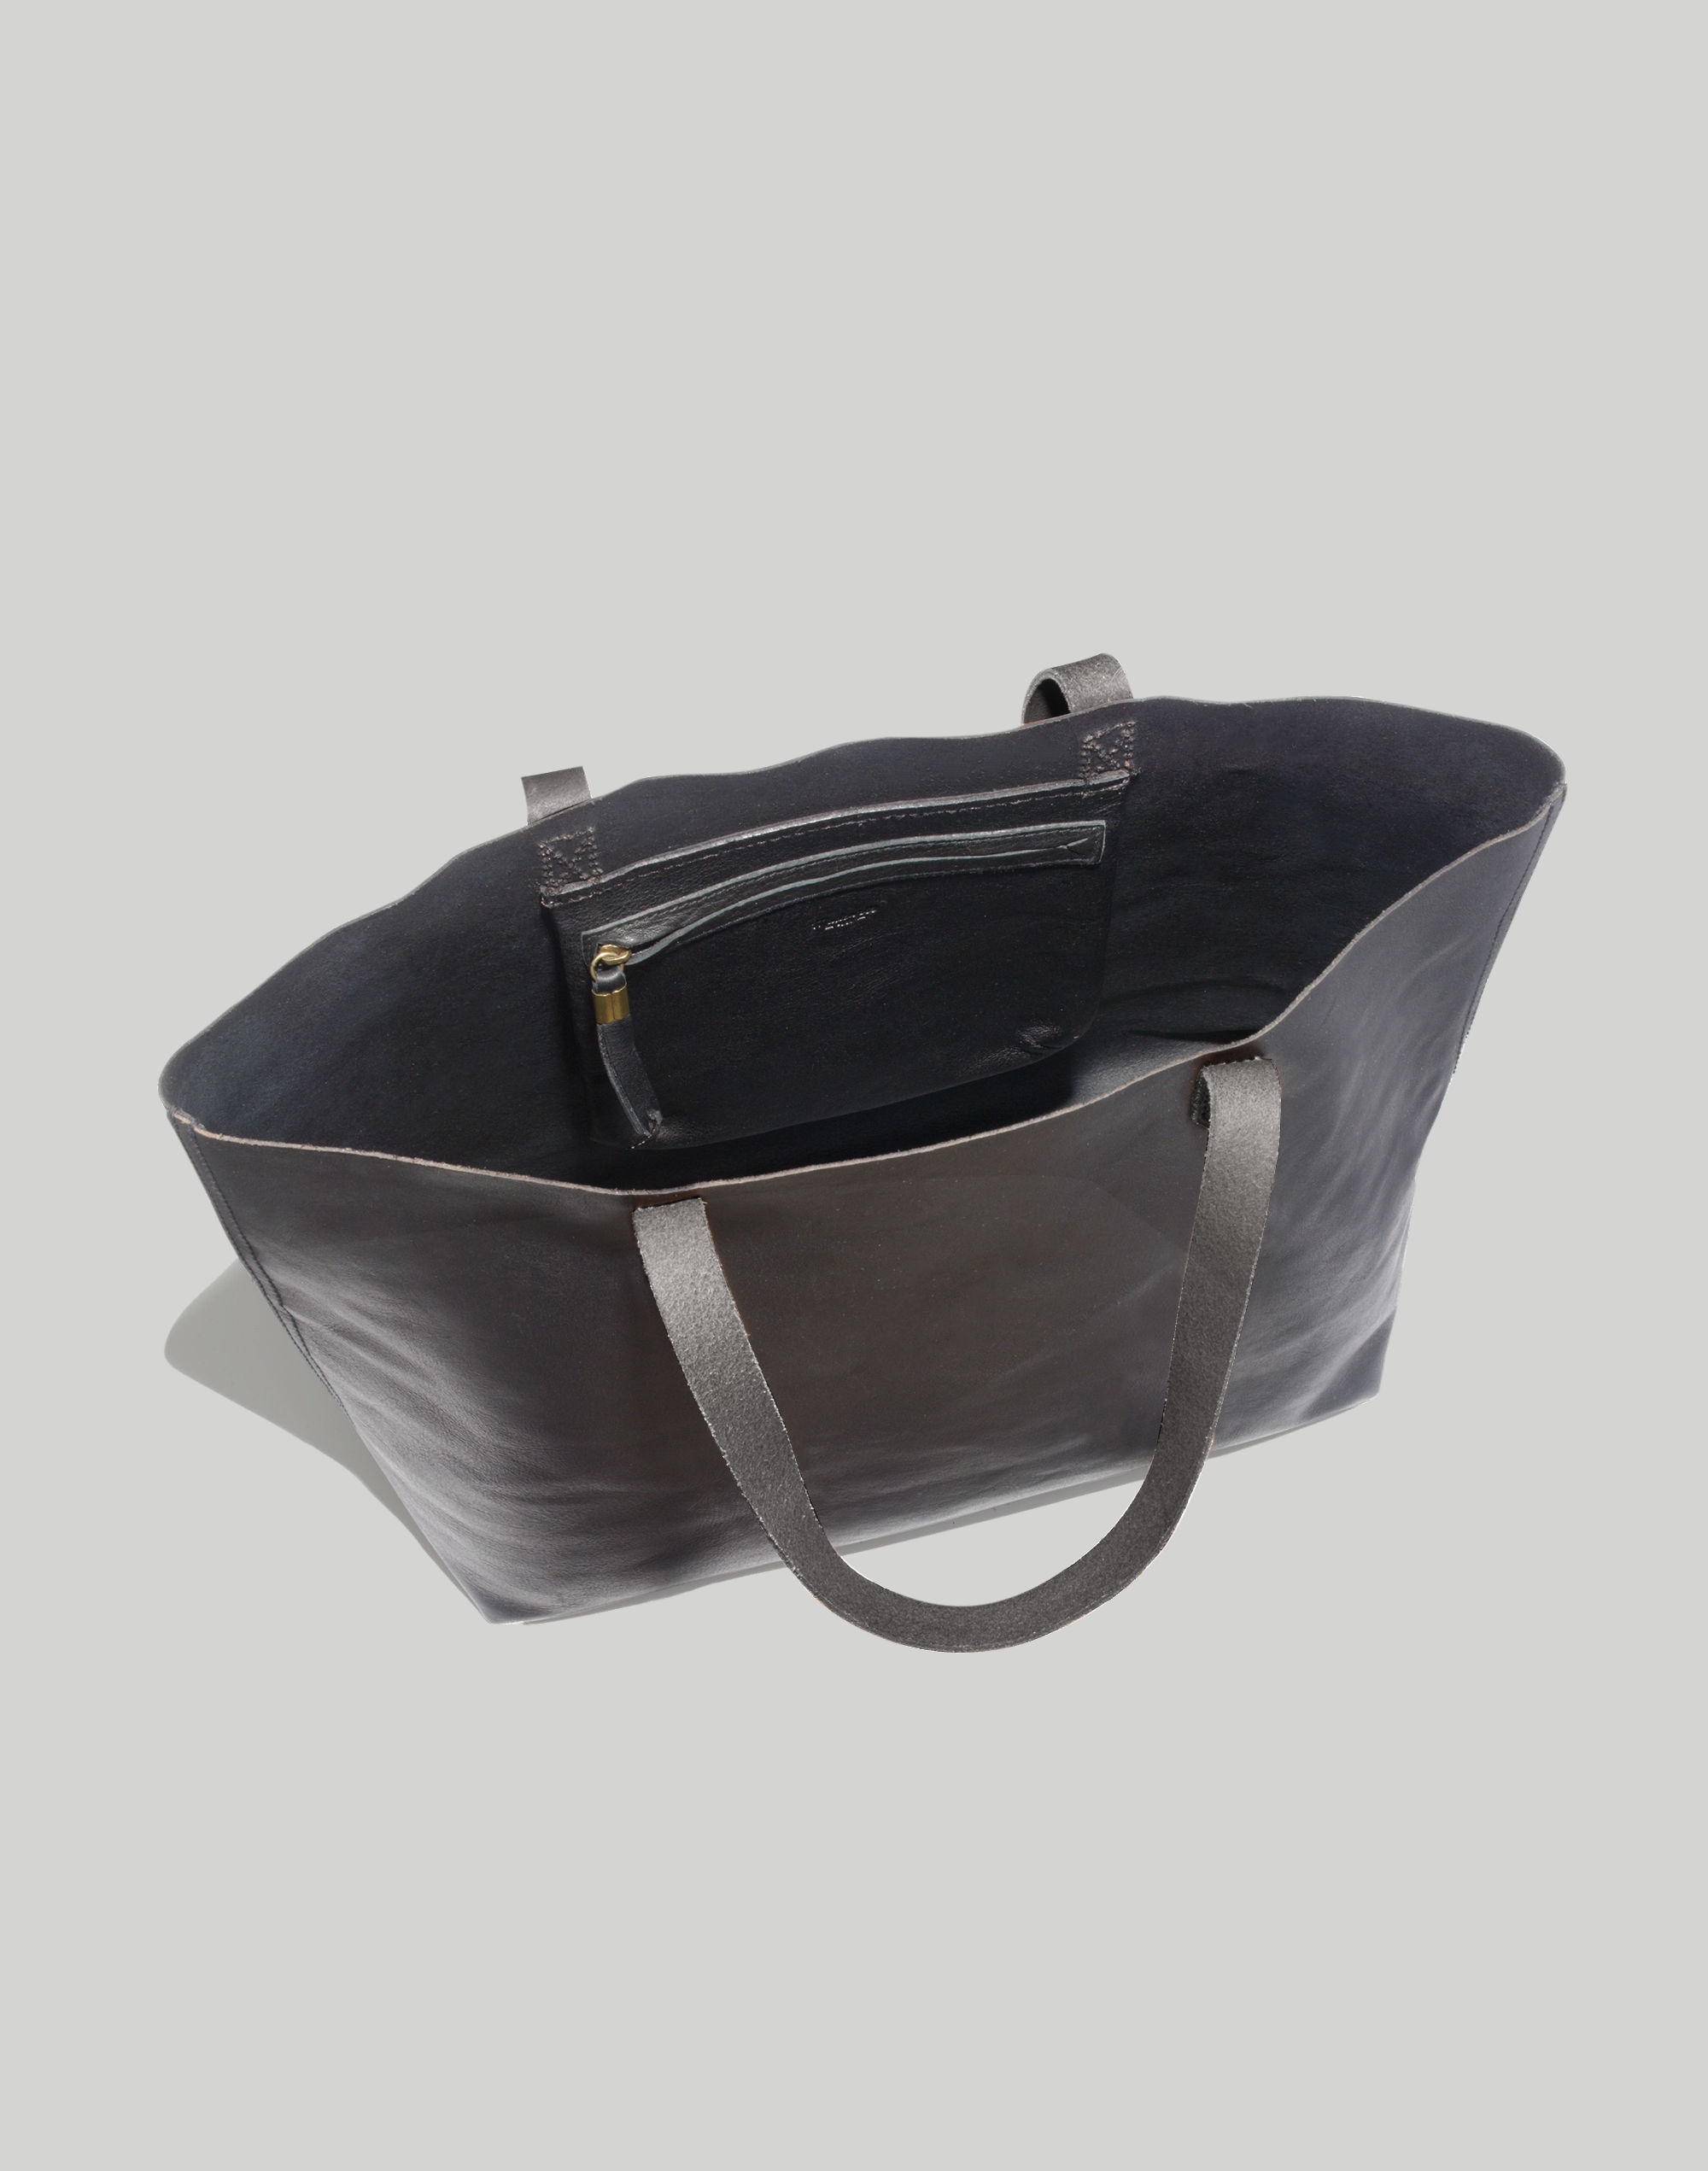 Bag Love  Madewell Medium Leather Transport Tote - Katie's Bliss